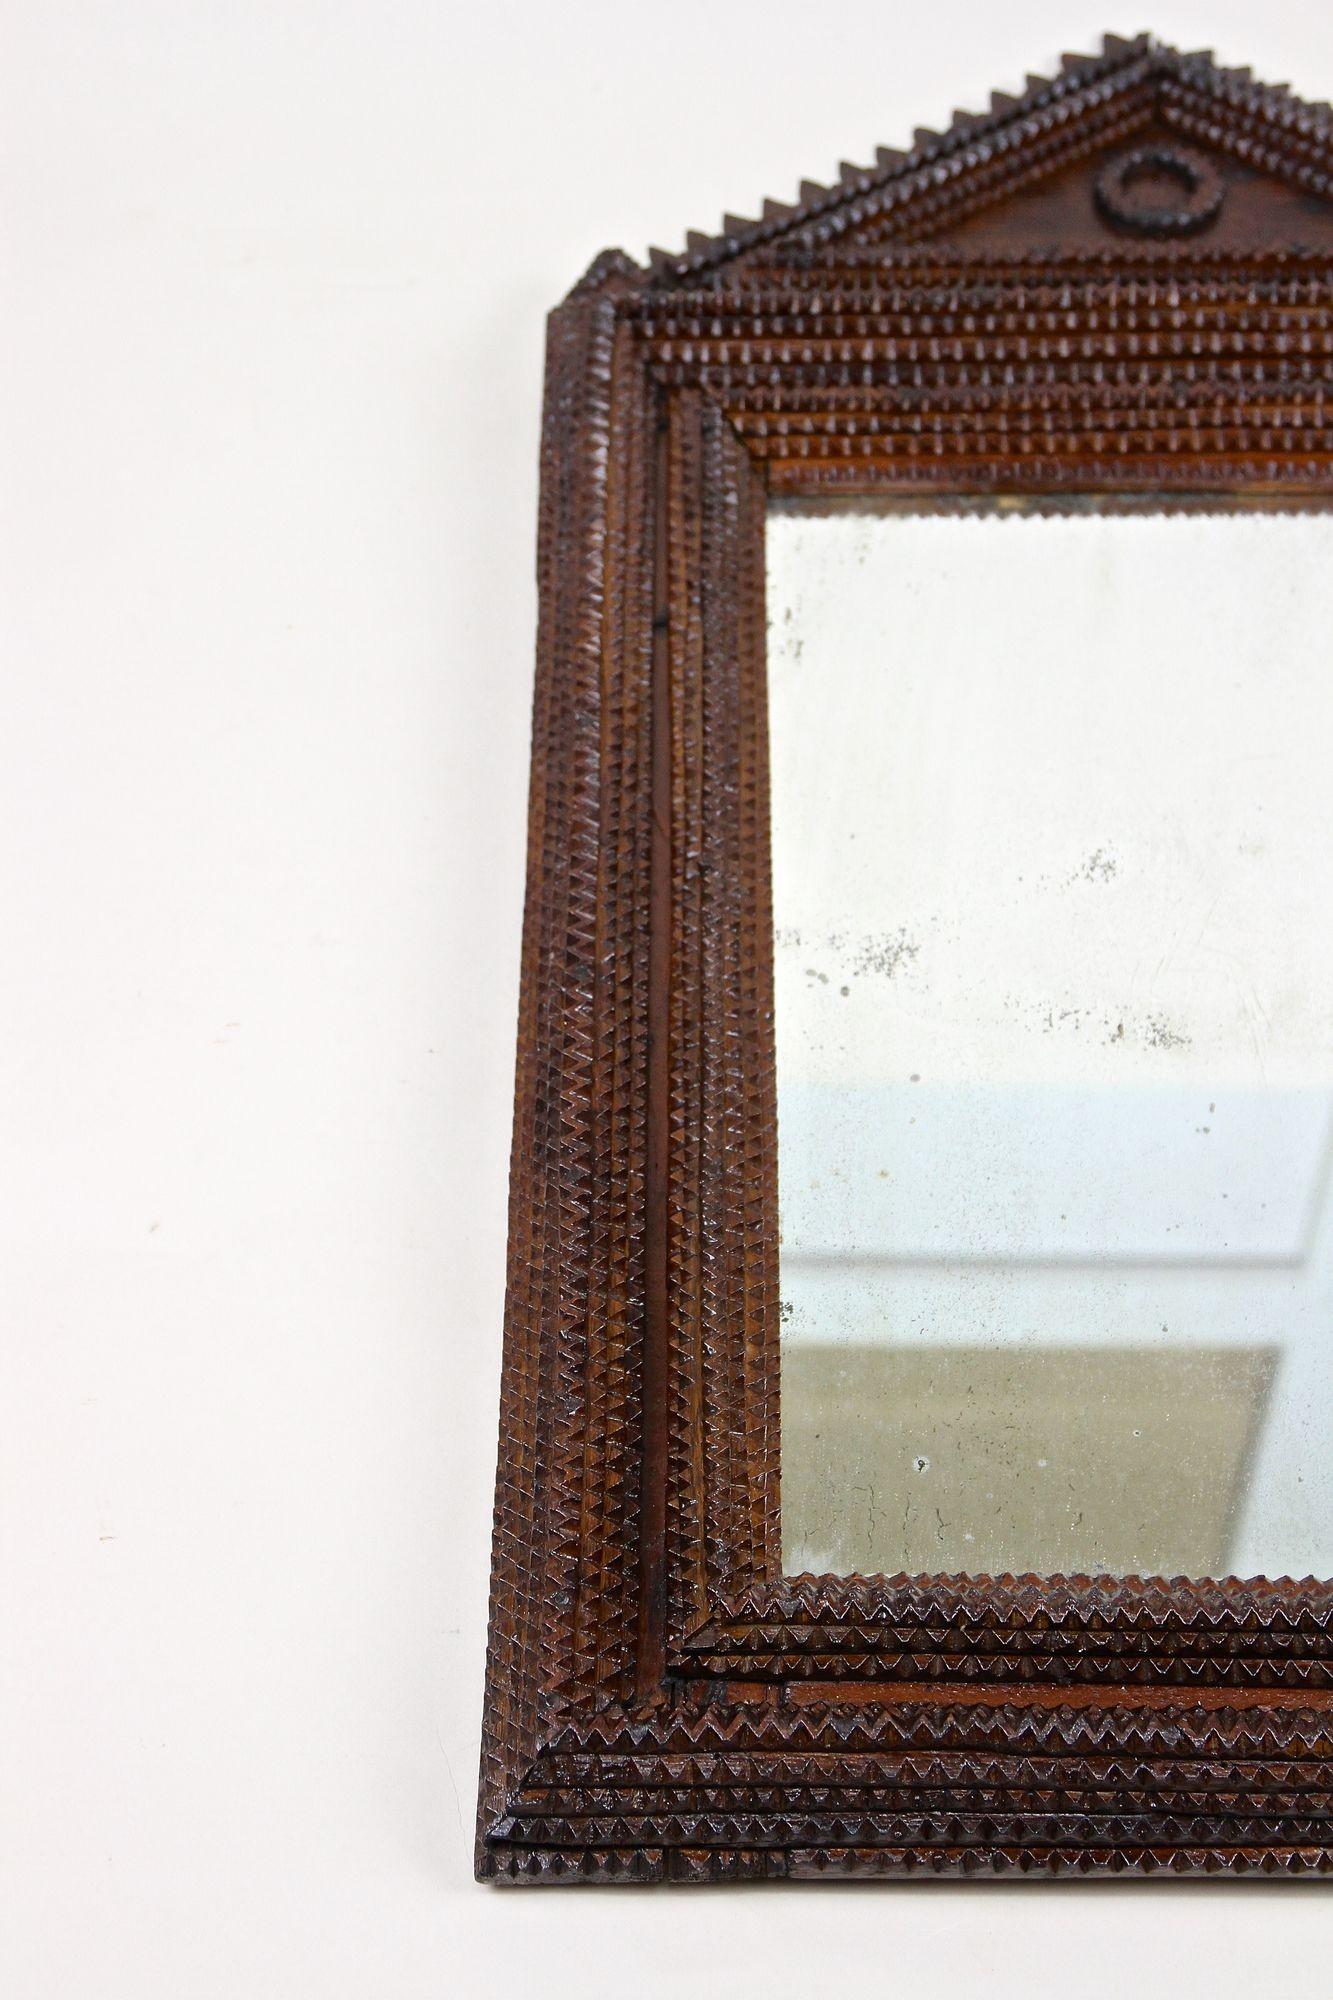 Rustic Tramp Art Wall Mirror With Original Mirror, Handcarved, Austria ca. 1860 For Sale 5